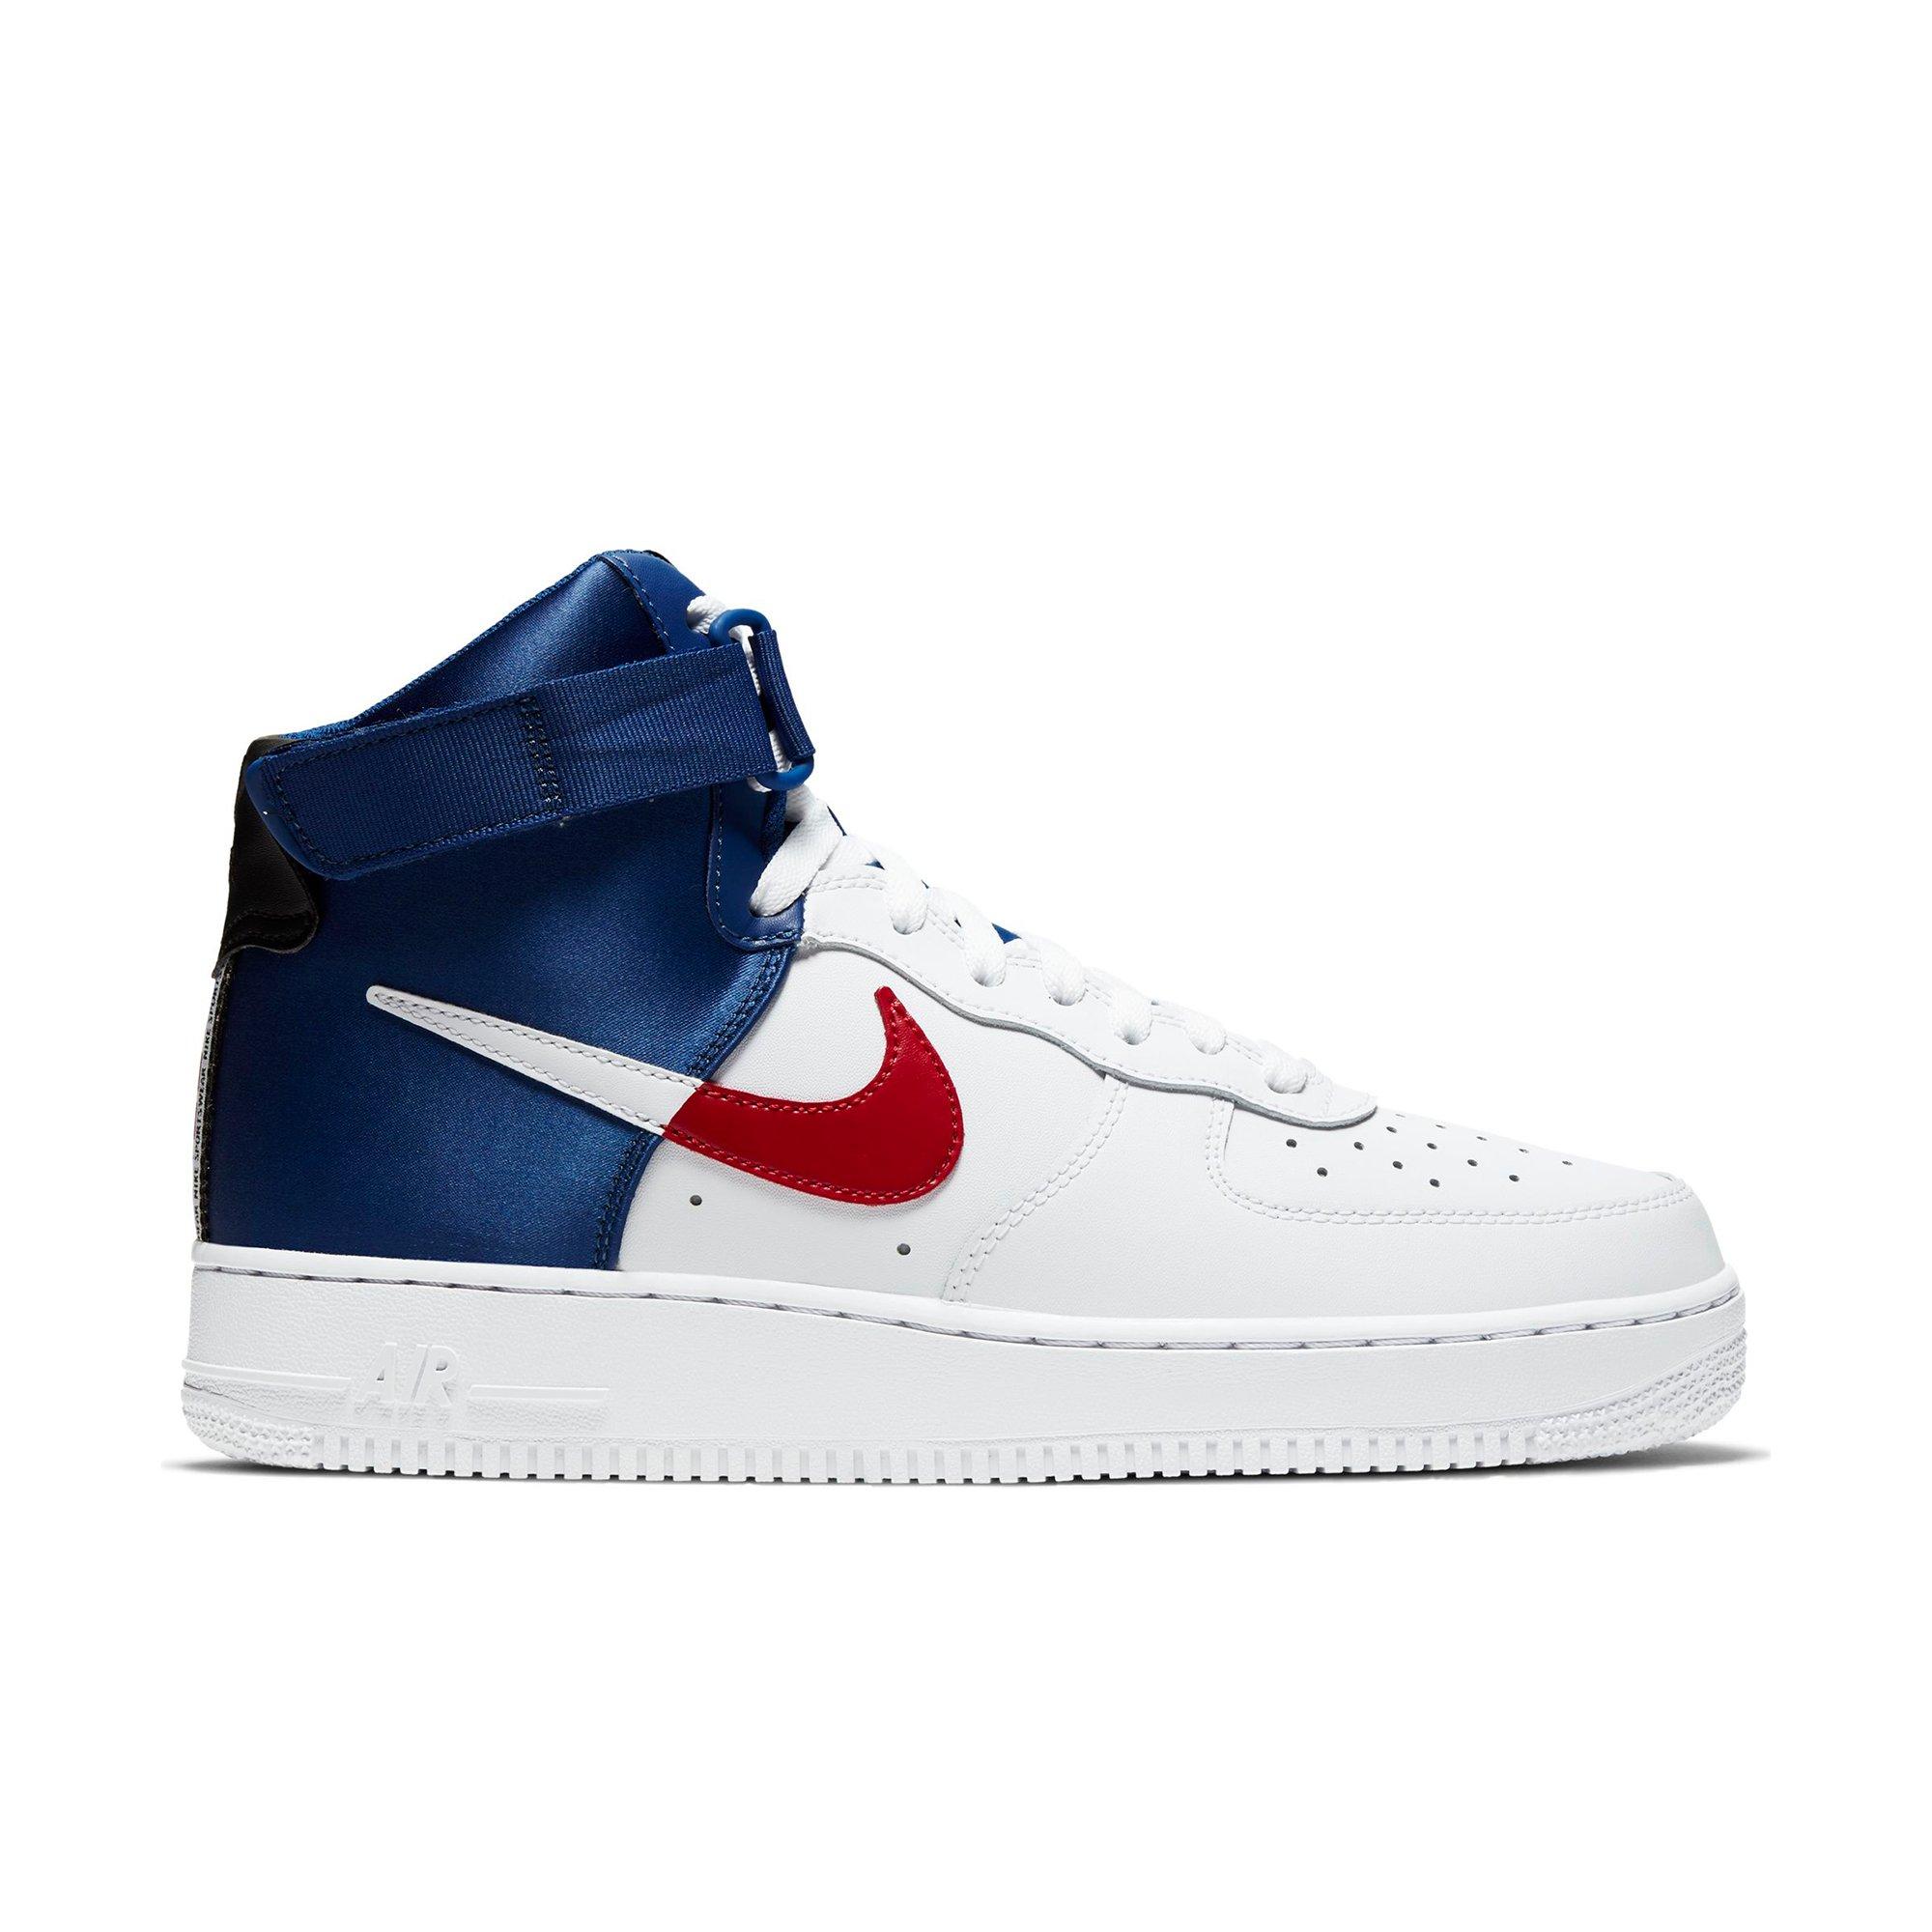 red and blue high top air force ones